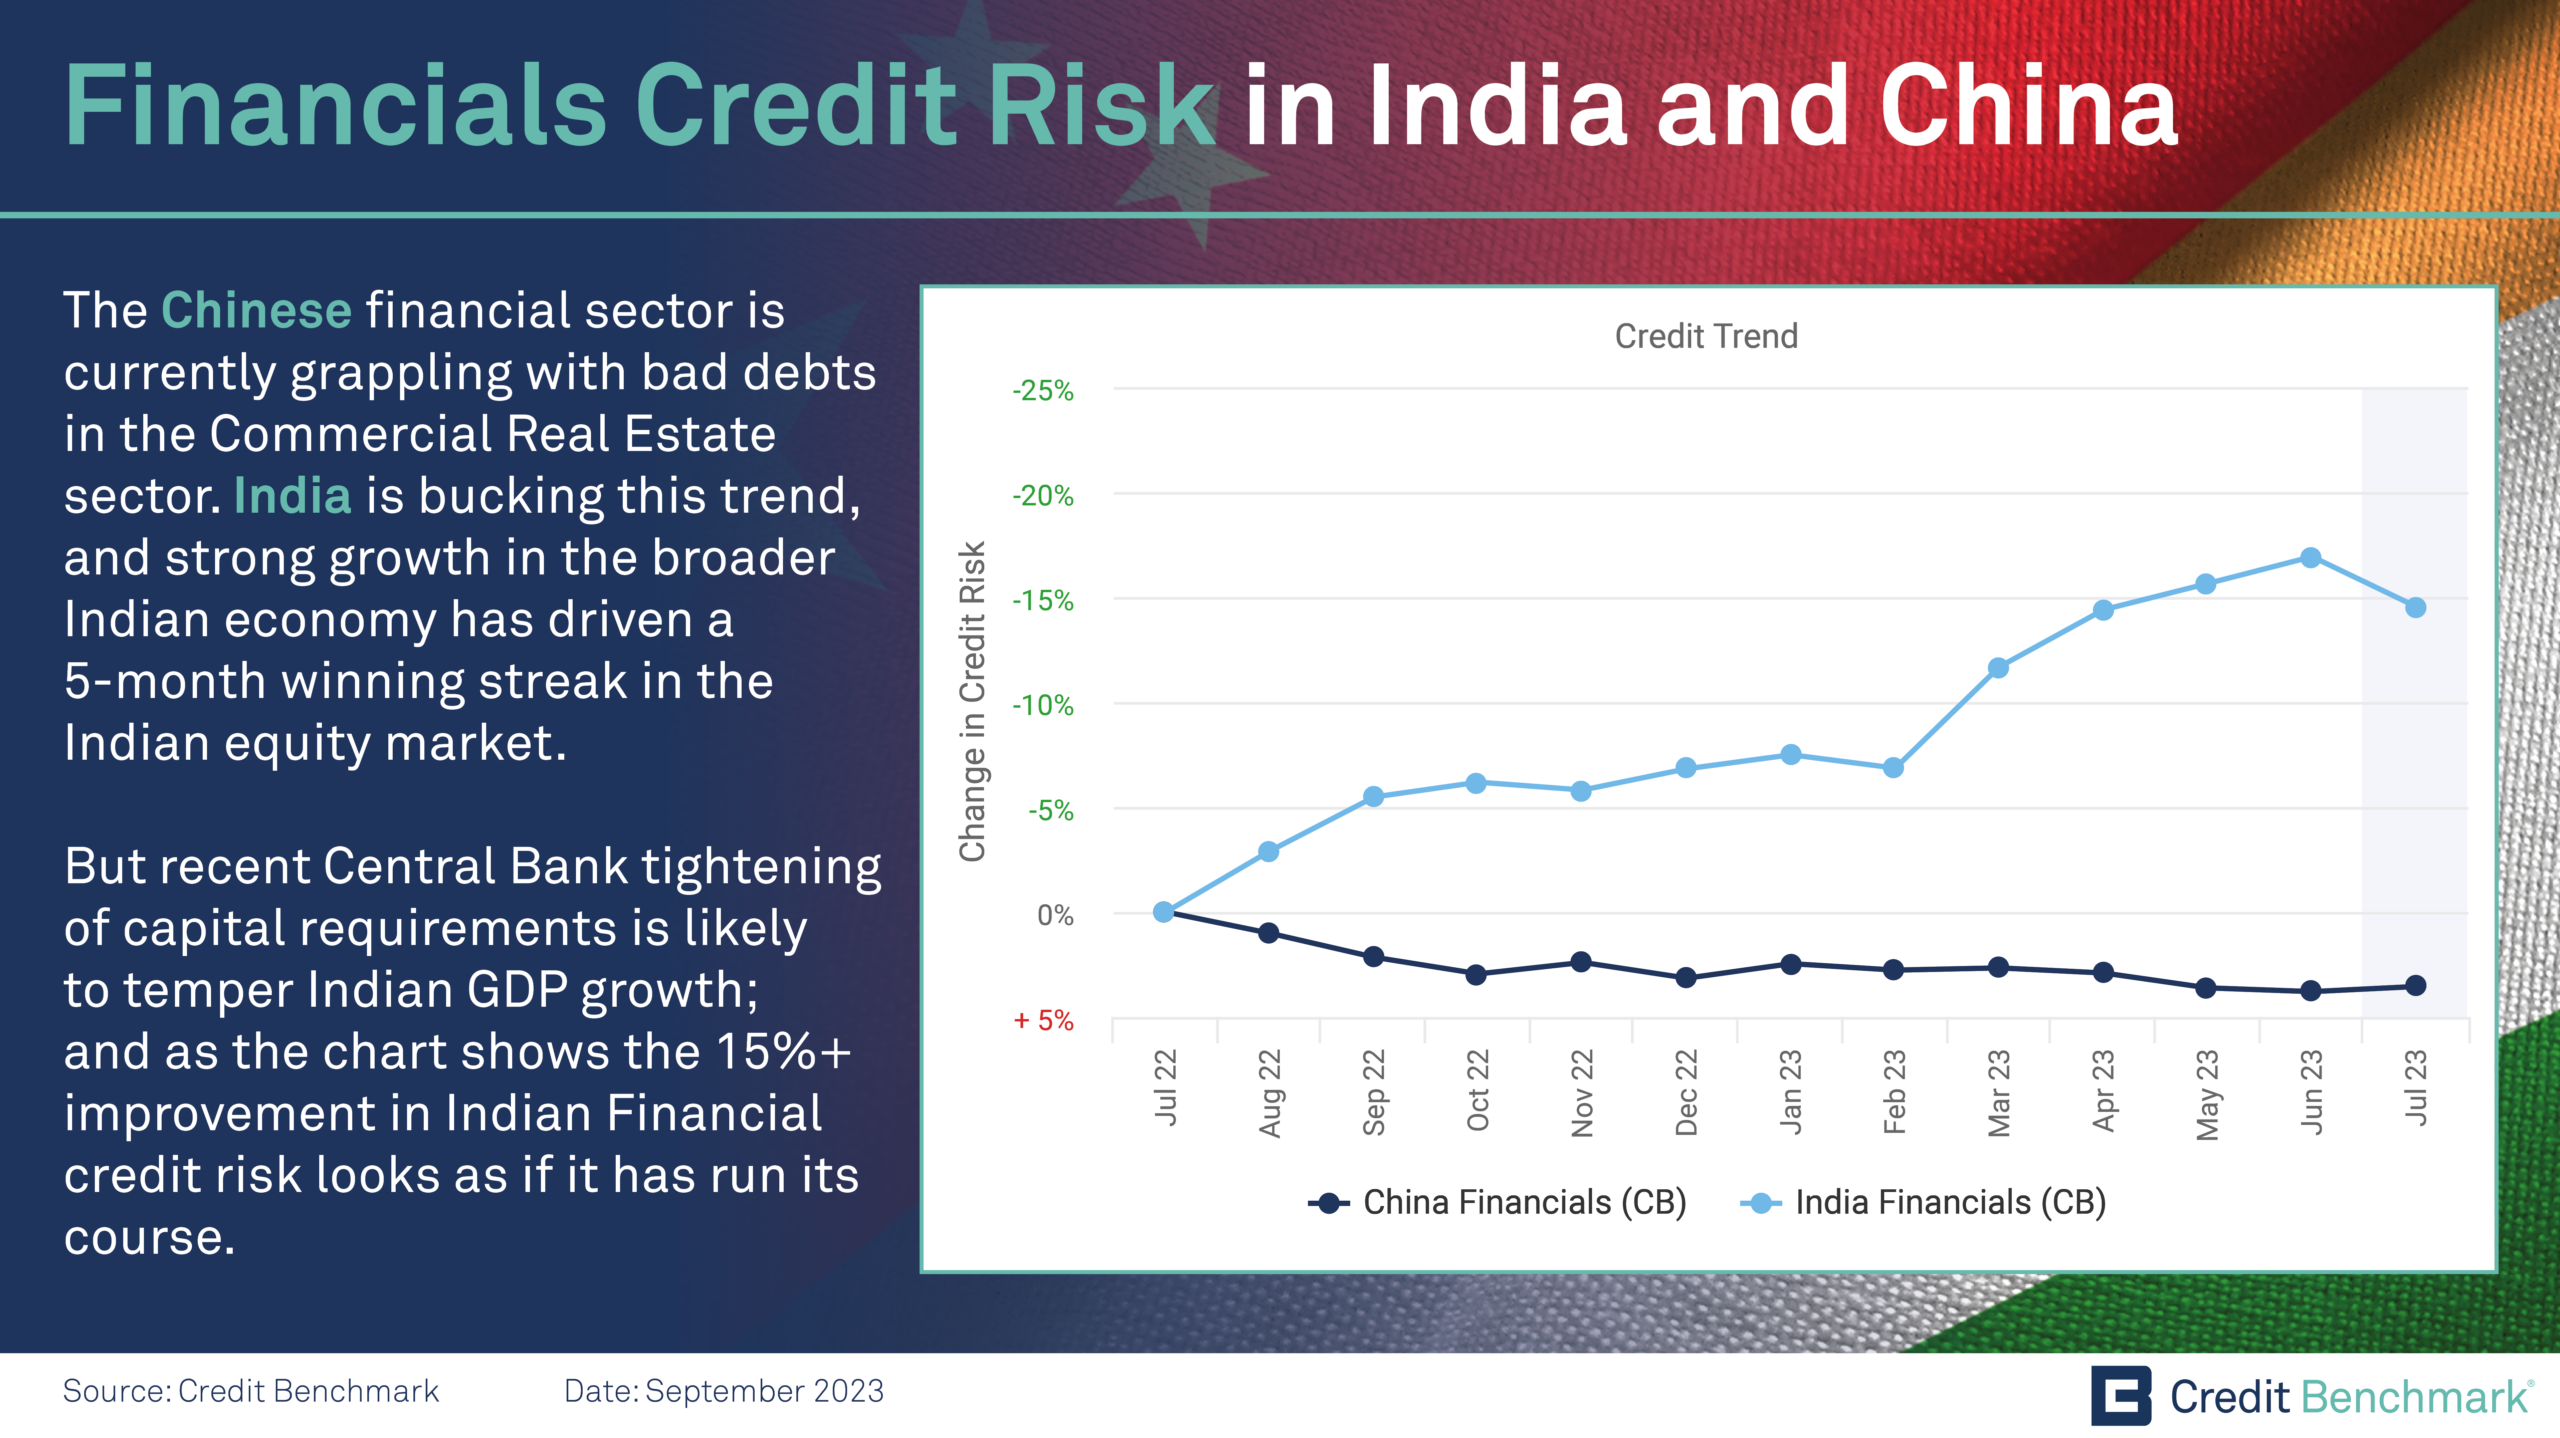 Financials Credit Risk in India and China